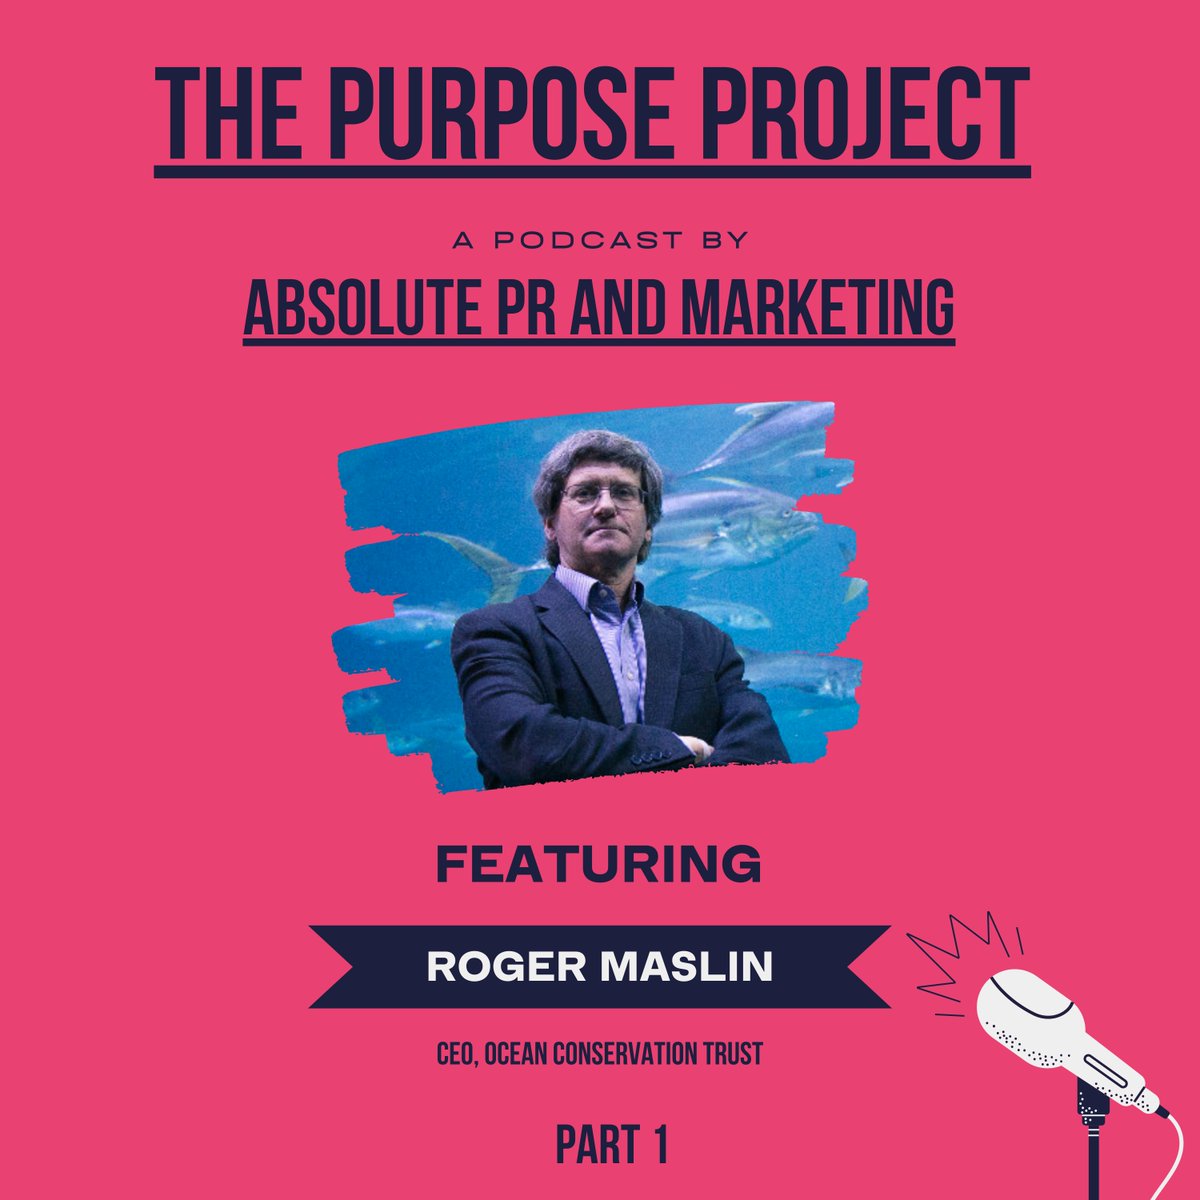 🔴 Part one of #TheAbsolutePurposeProject with Roger Maslin is now live!

🌊 We speak with Roger, CEO of @NMAPlymouth, about topics including leadership & building trust in working life and measuring attitudes & understanding of the sea in the UK.

Listen: open.spotify.com/episode/1rzZEC…